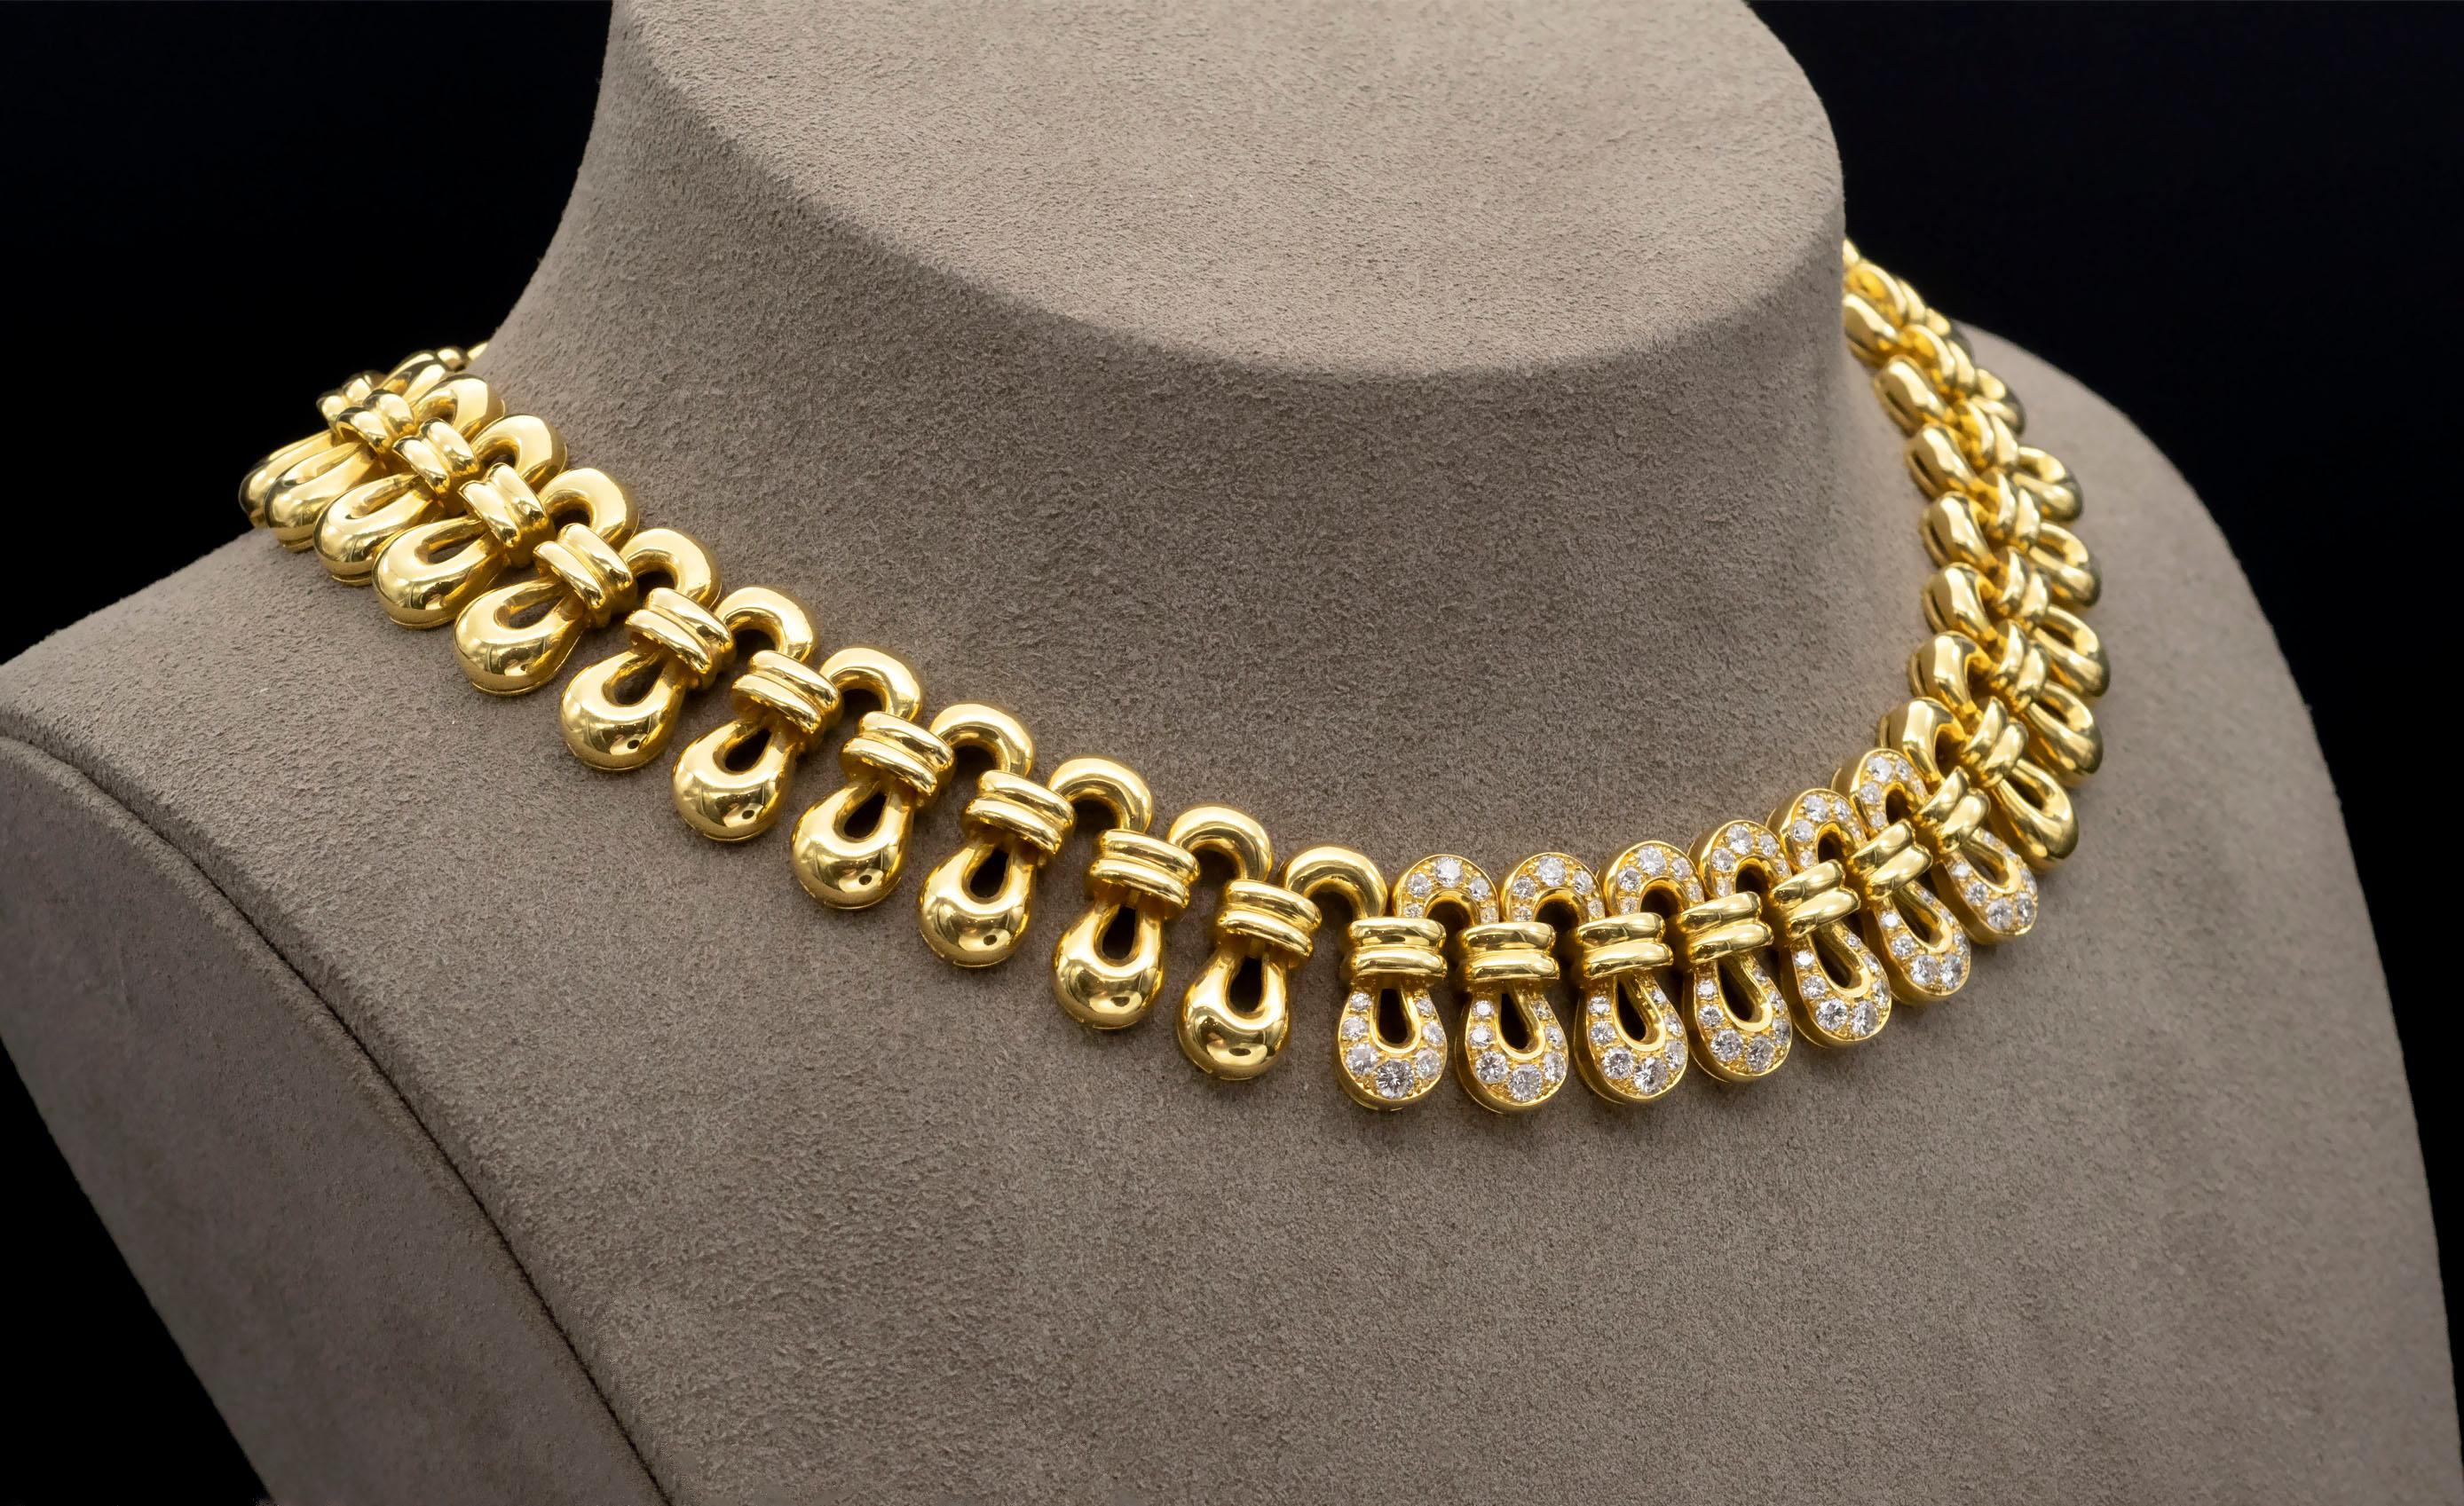 Stylish 18 karat Gold choker necklace set with 2.6 carats of high quality pave set round brilliant cut diamonds ( F-G color, VVS-VS clarity). It is fully articulated and sits perfectly on the neck, the make is excellent.
Length 38 cm
Weight 95.2